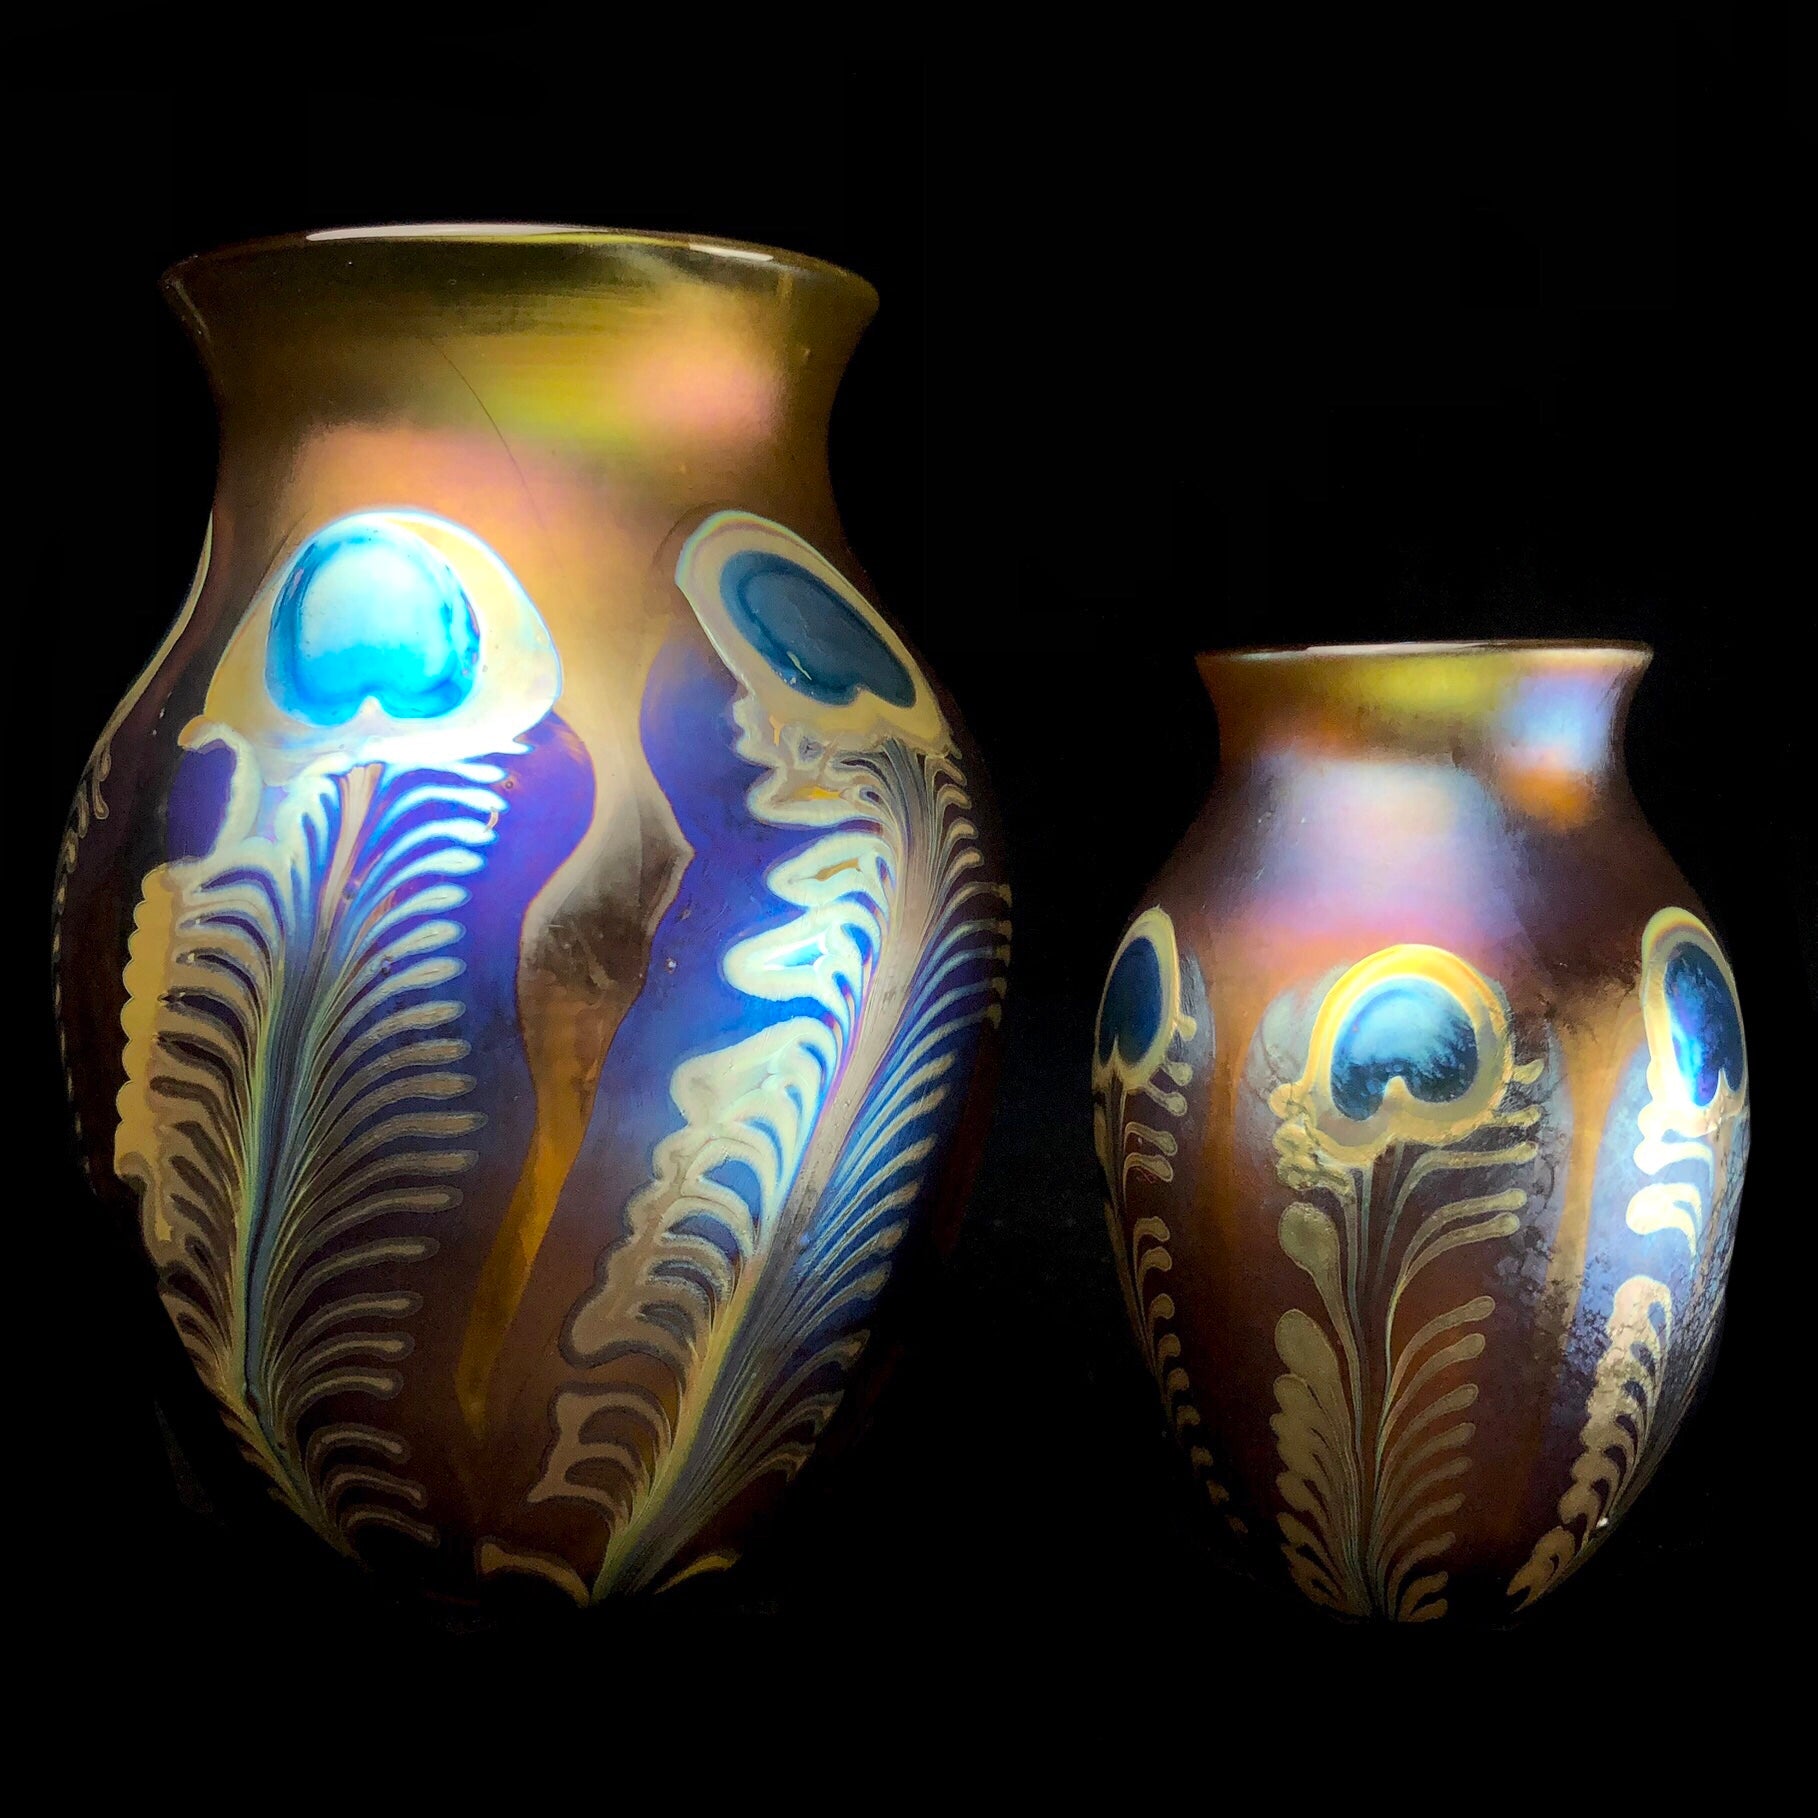 Small and Large Amber Feather Vase shown side by side